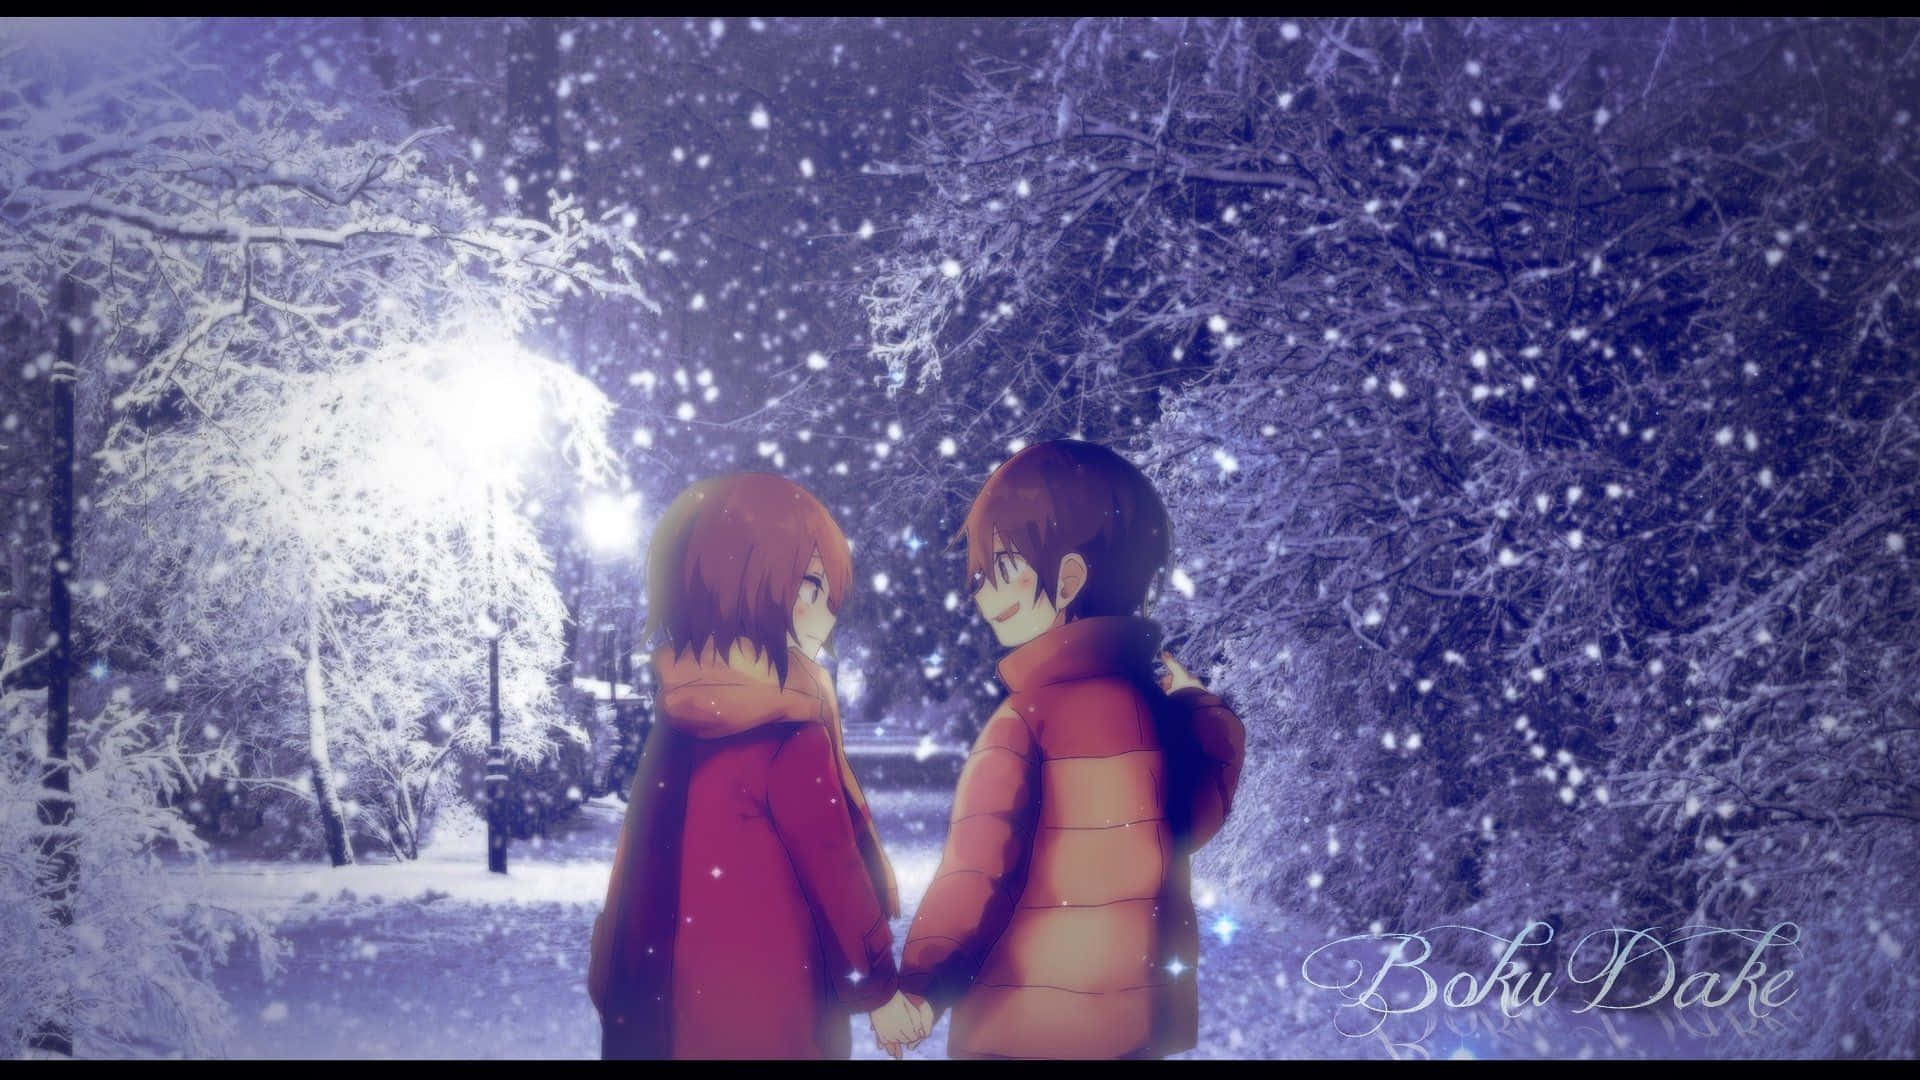 Eri, the protagonist of Erased, on the brink of a life-changing adventure.